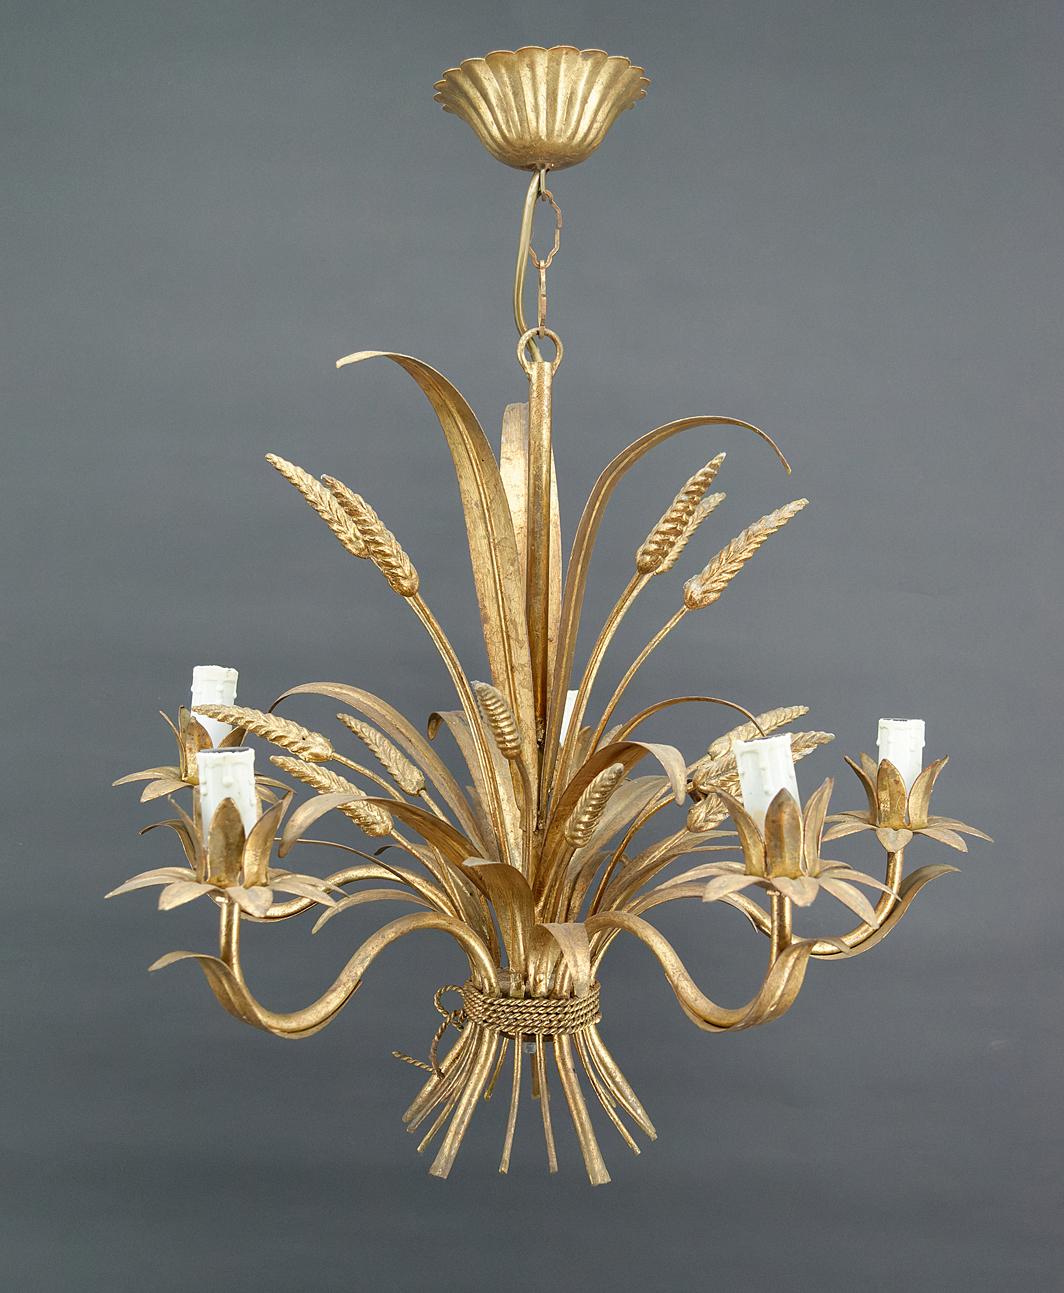 
Elegant pendant light / chandelier with 5 lights in gold metal, representing a bouquet of ears of wheat.

Hollywood Regency / Mid-century Modern style, circa 1960.

In the style of Goossens productions, Maison Jansen.

In good